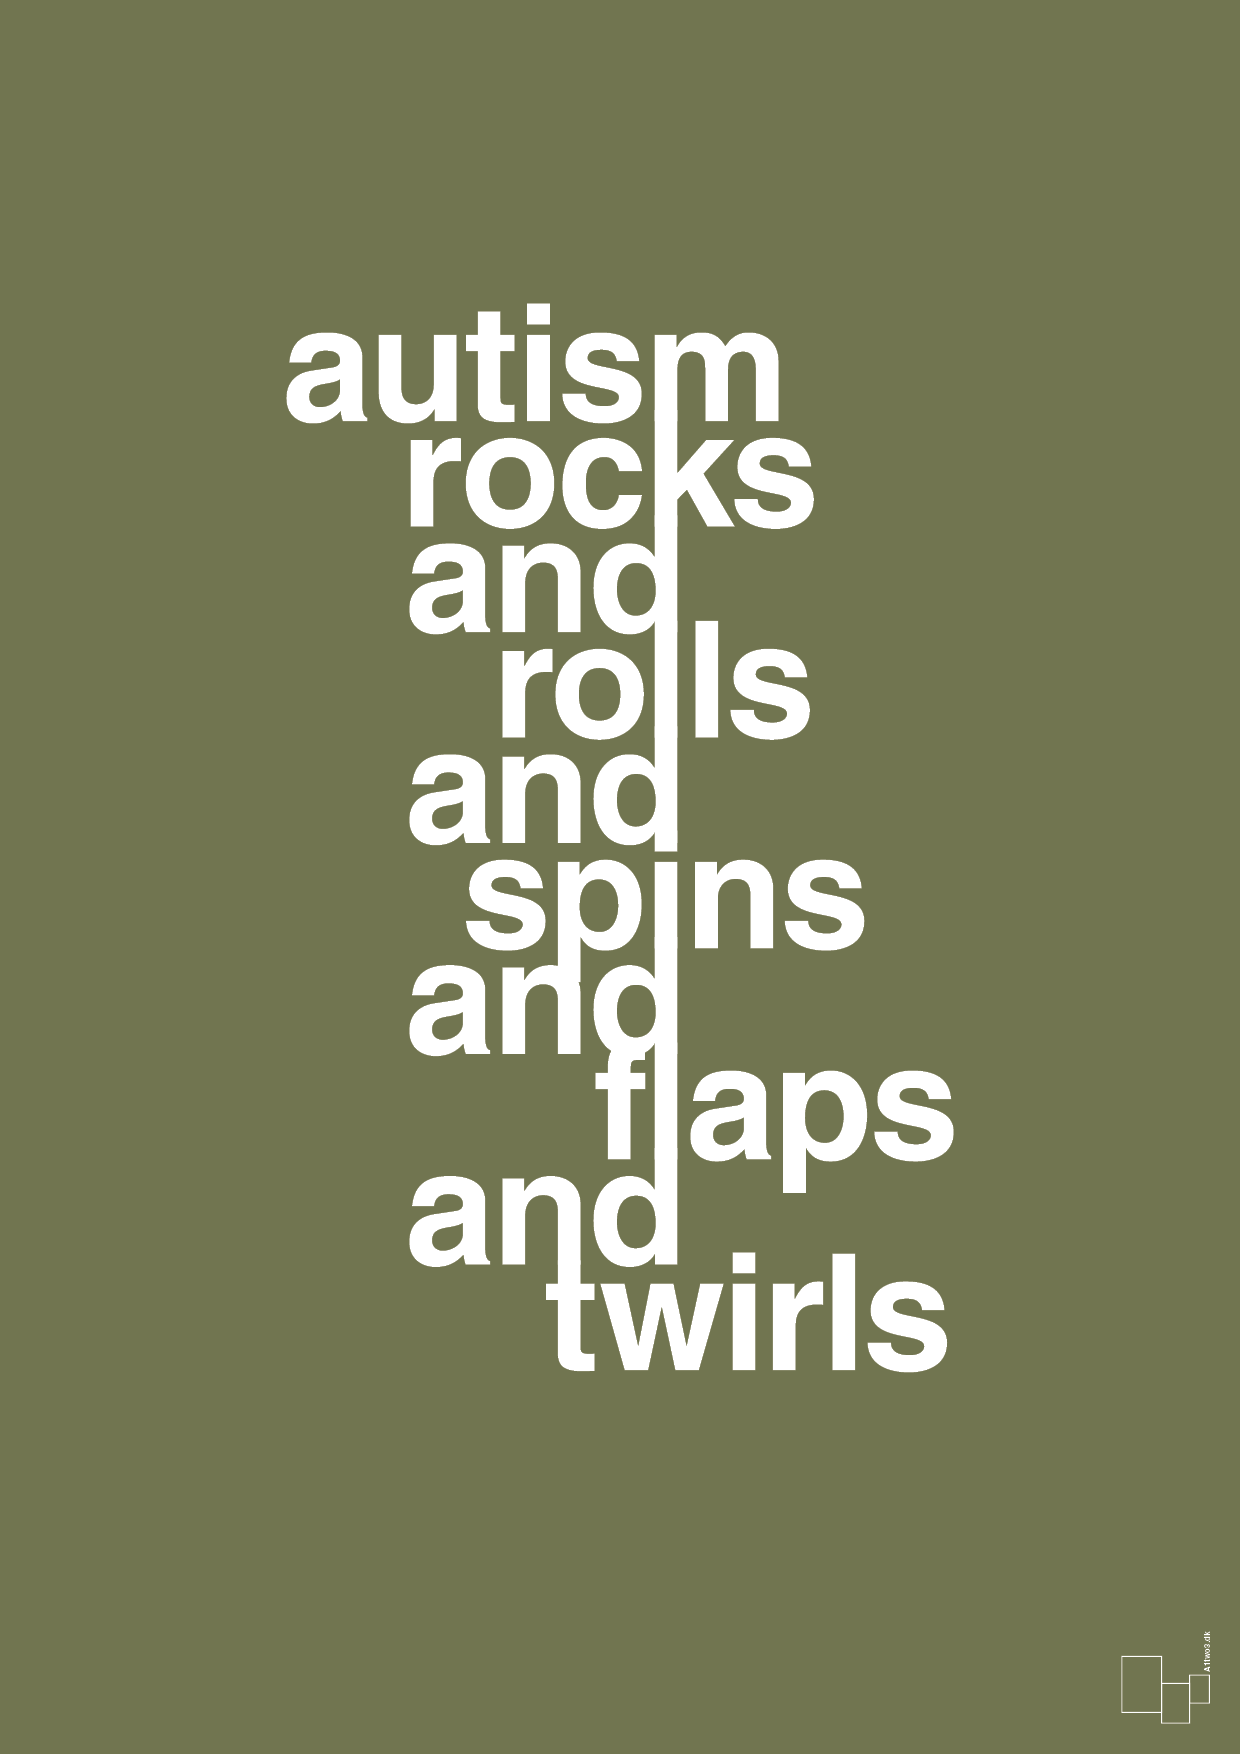 autism rocks and rolls and spins and flaps and twirls - Plakat med Samfund i Secret Meadow